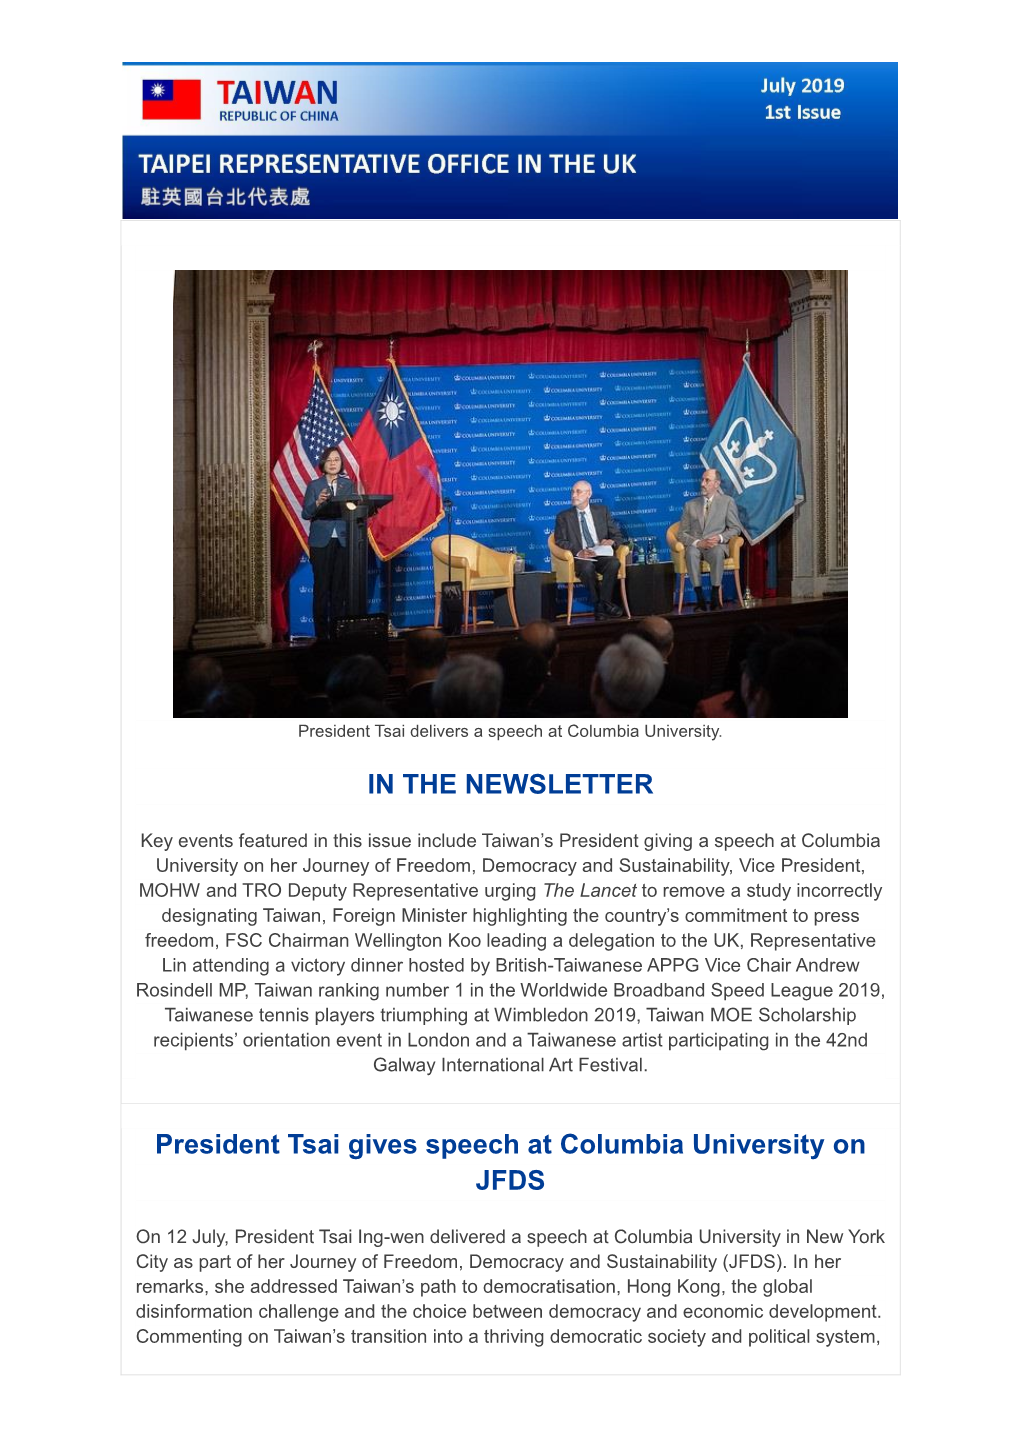 IN the NEWSLETTER President Tsai Gives Speech at Columbia